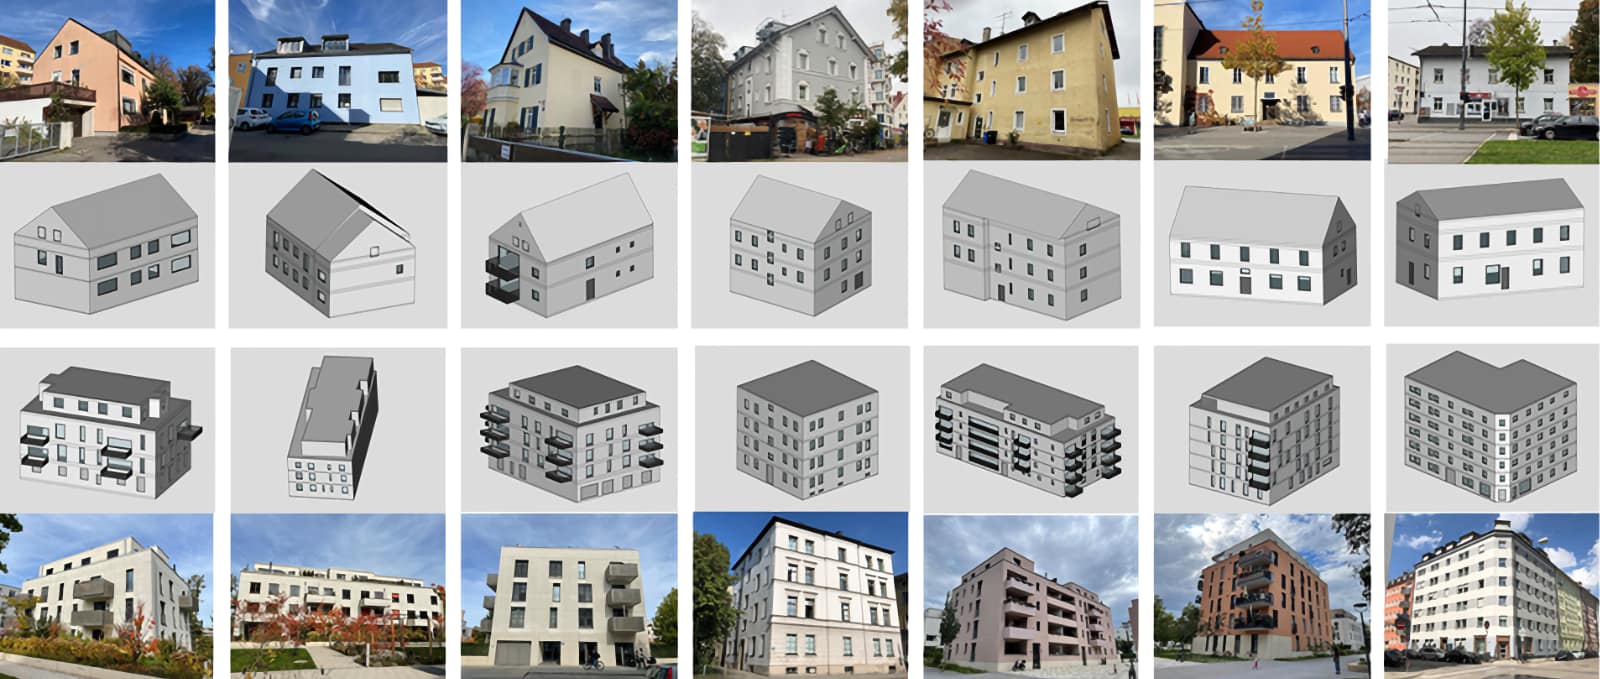 Some of the building models generated with the tool